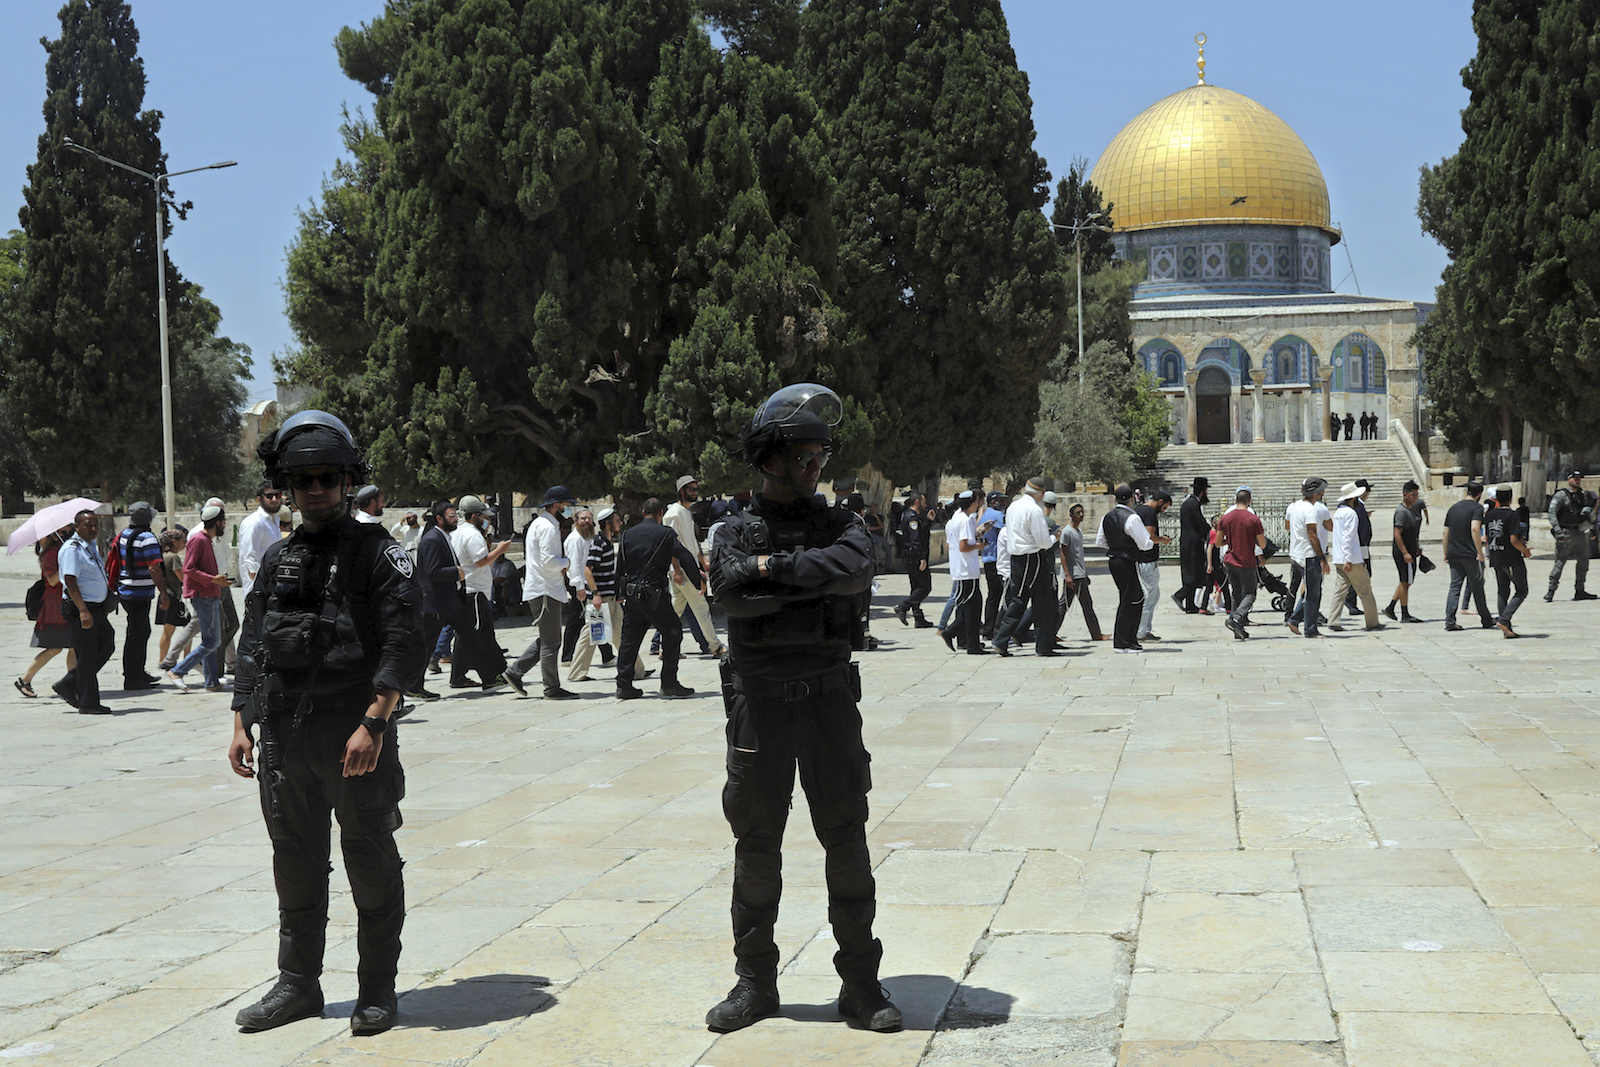 Israeli police officers stand guard as Jewish men visit the Dome of the Rock Mosque in the Al-Aqsa Mosque compound in the Old City of Jerusalem during the mourning ritual of Tisha B'Av (Ninth of Av) fasting and a memorial day, commemorating the destruction of ancient Jerusalem temples, Sunday, July 18, 2021. (AP Photo/Mahmoud Illean)